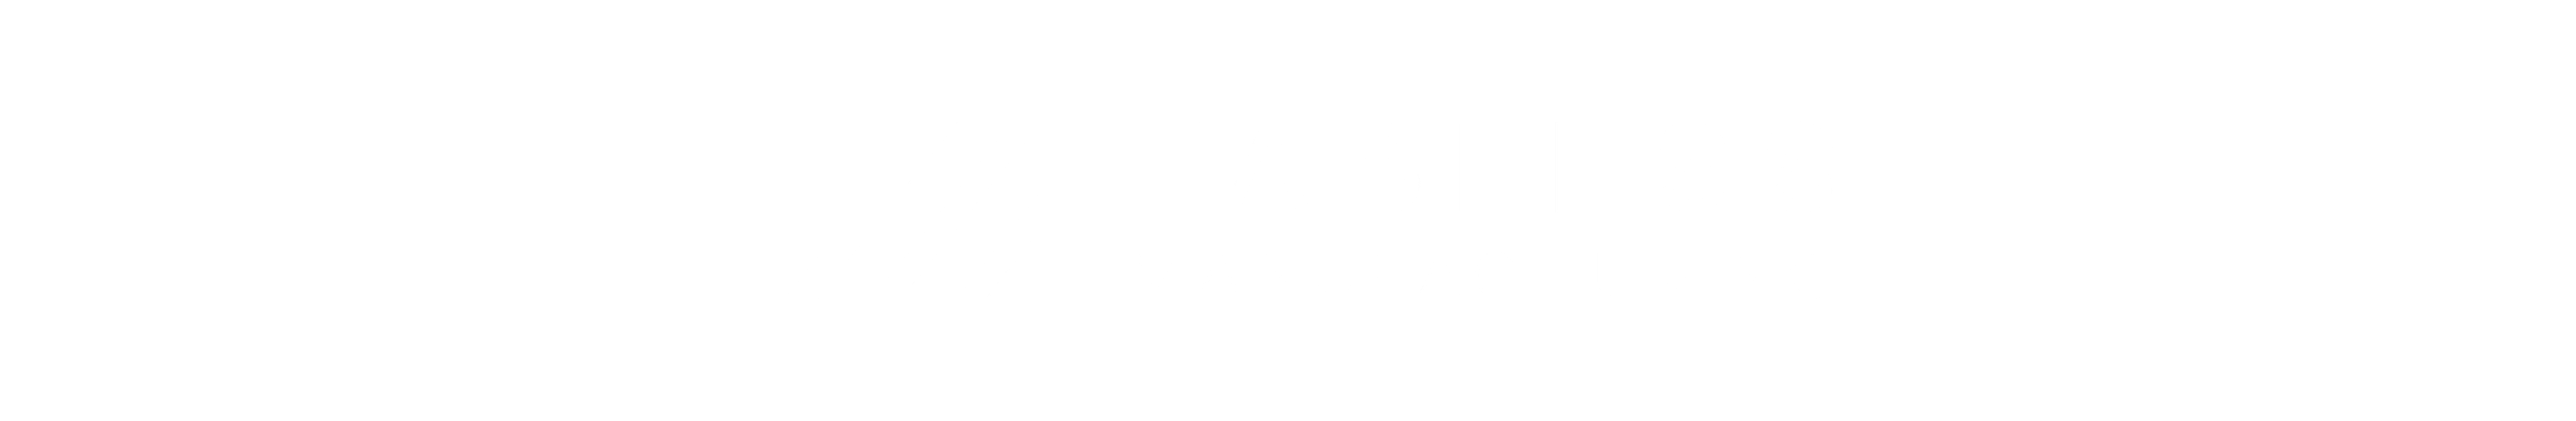 fabless manufacturing logo